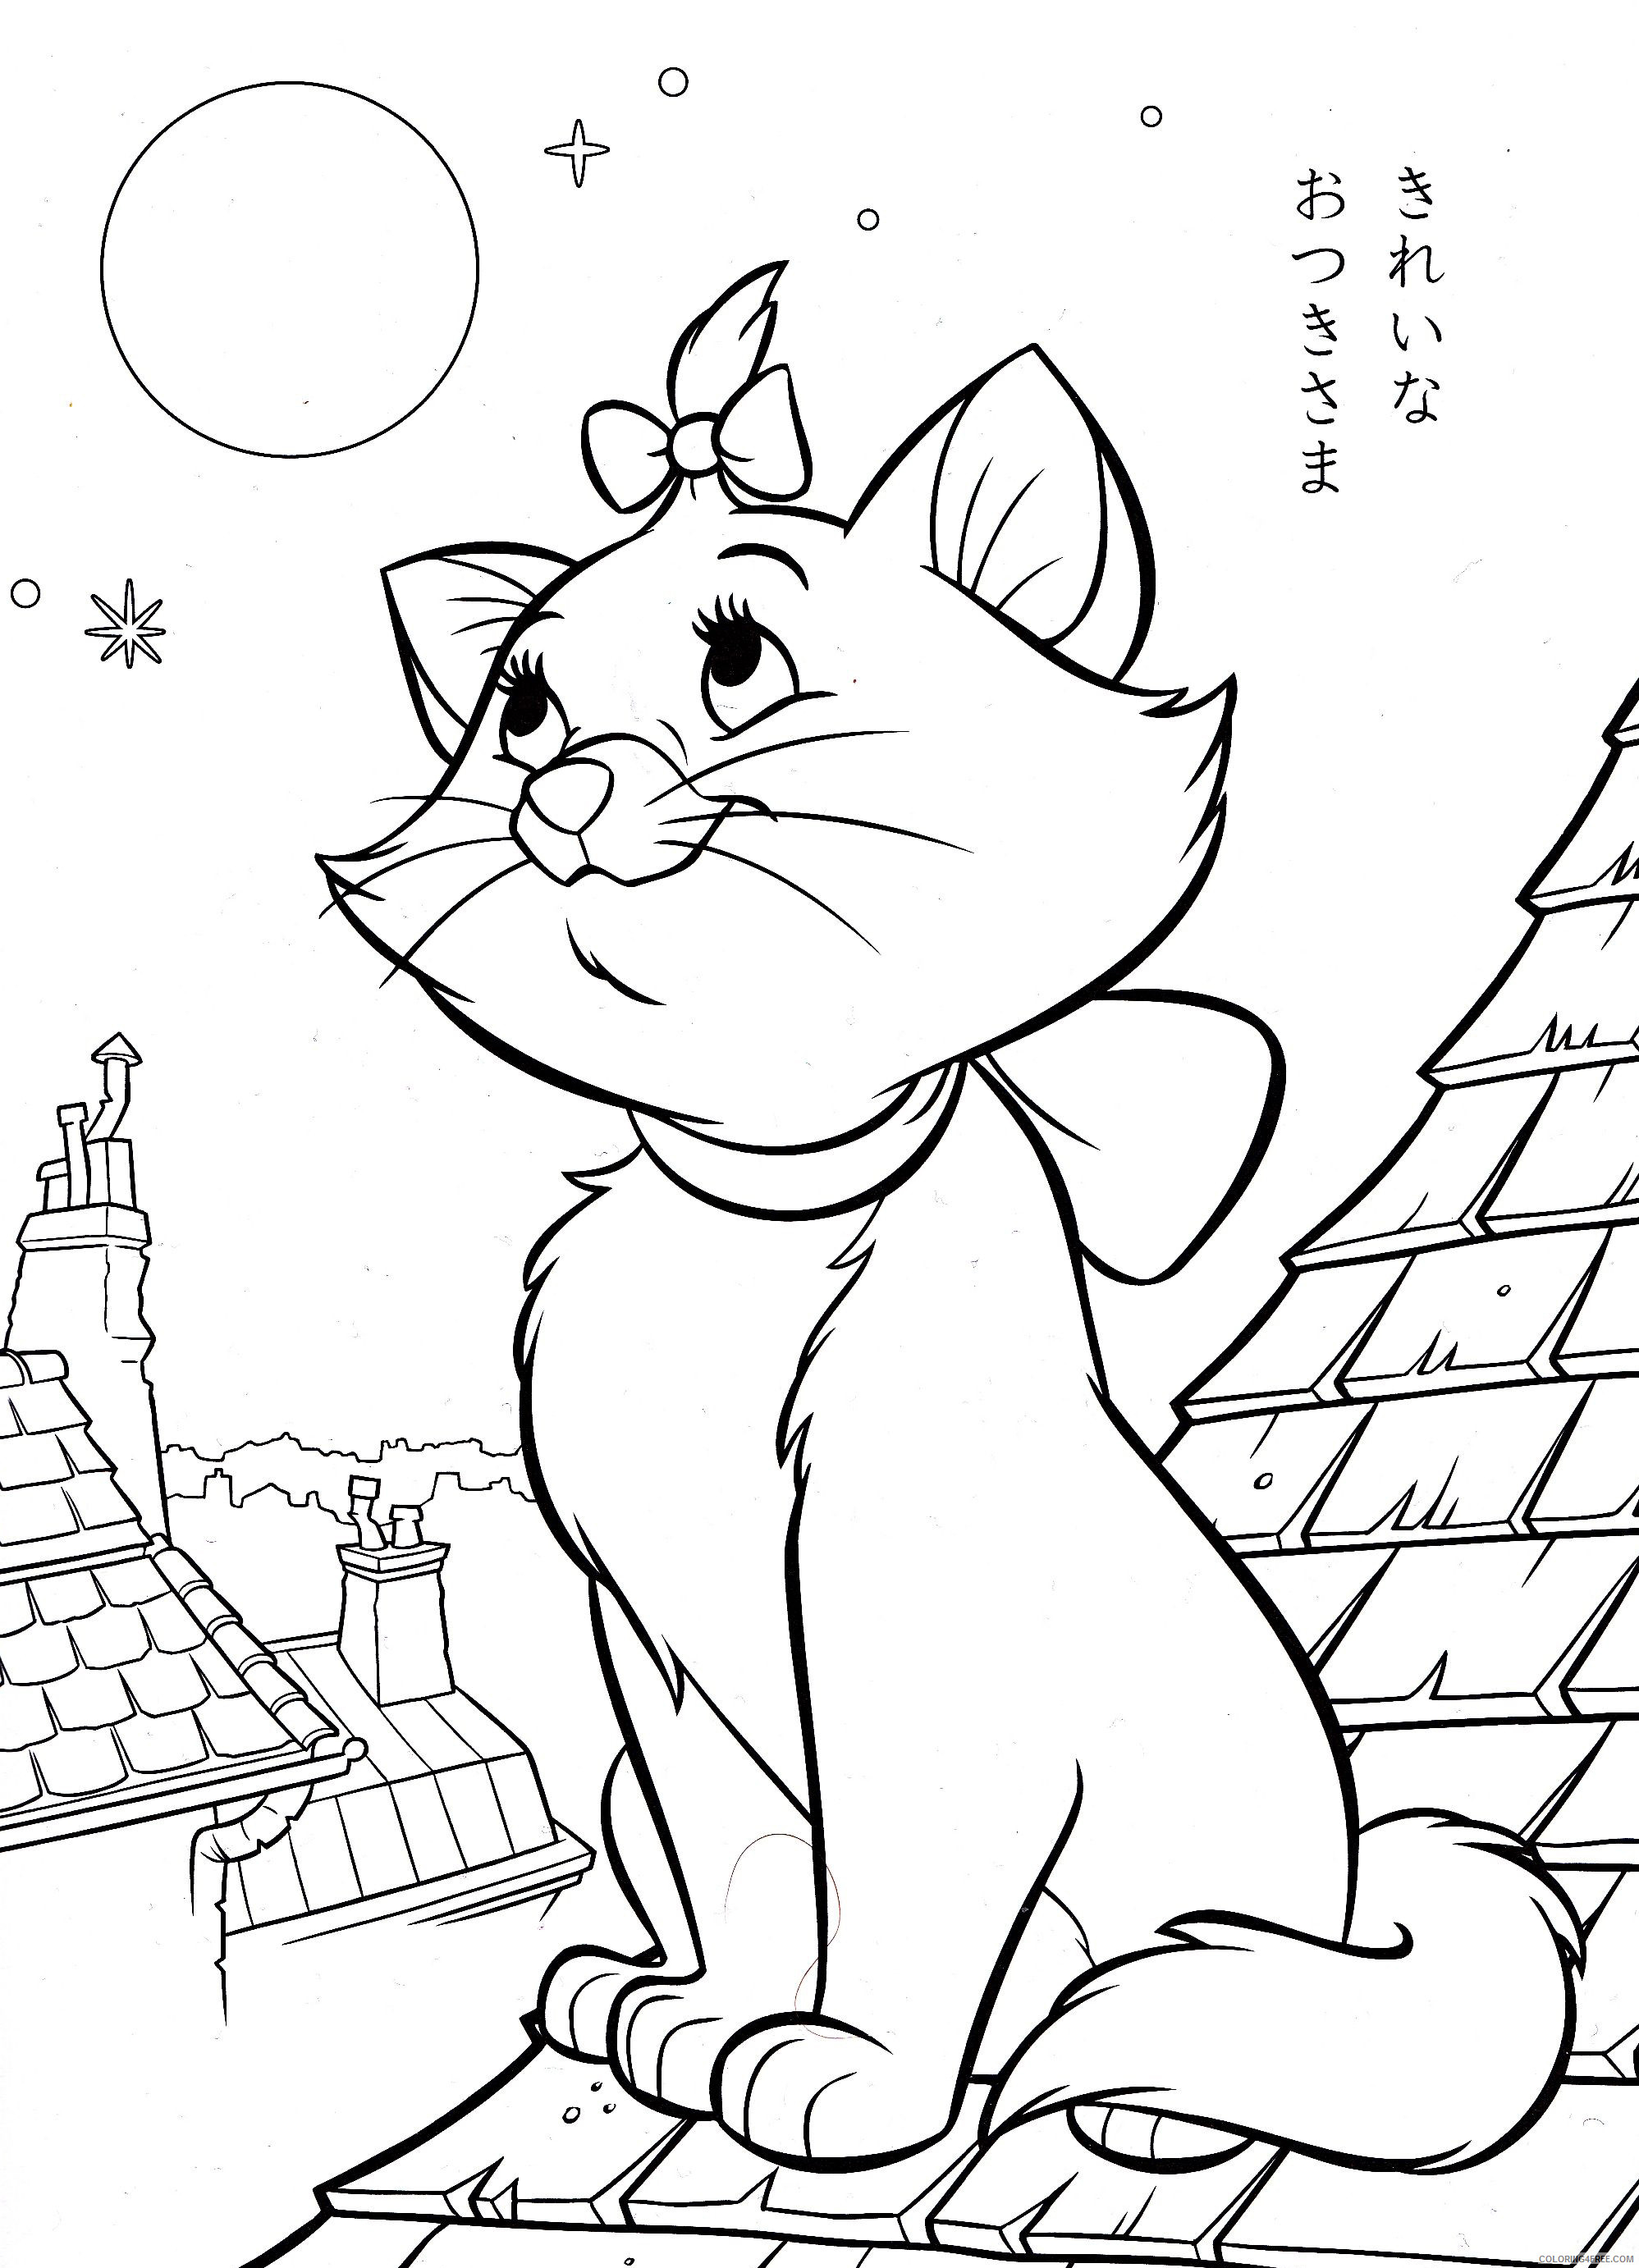 Aristocats Coloring Pages Cartoons Aristocats Disney for Adults Printable 2020 0630 Coloring4free